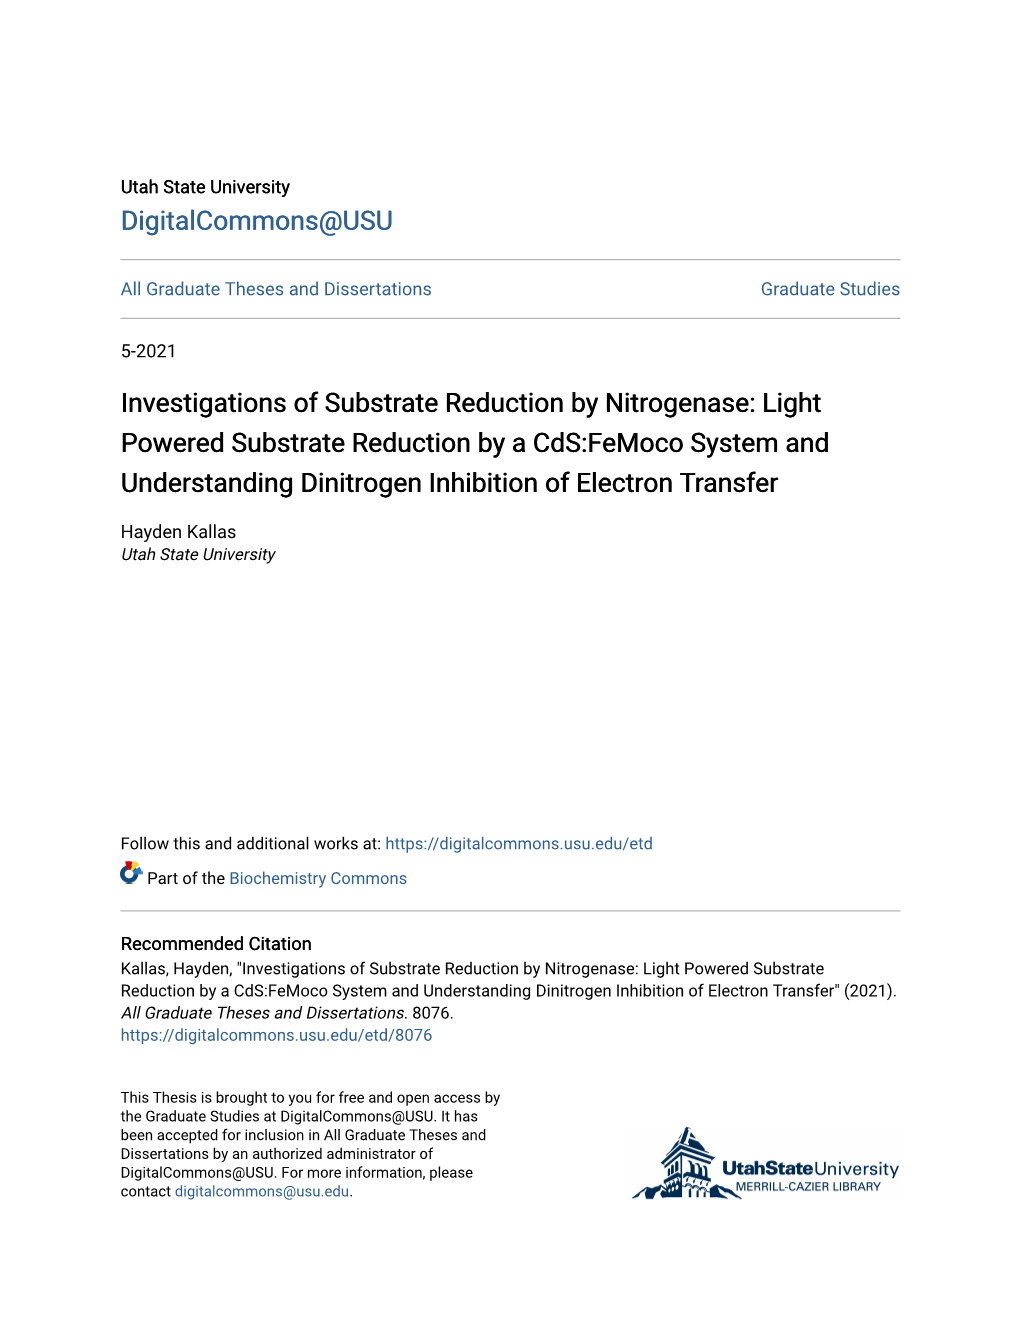 Investigations of Substrate Reduction by Nitrogenase